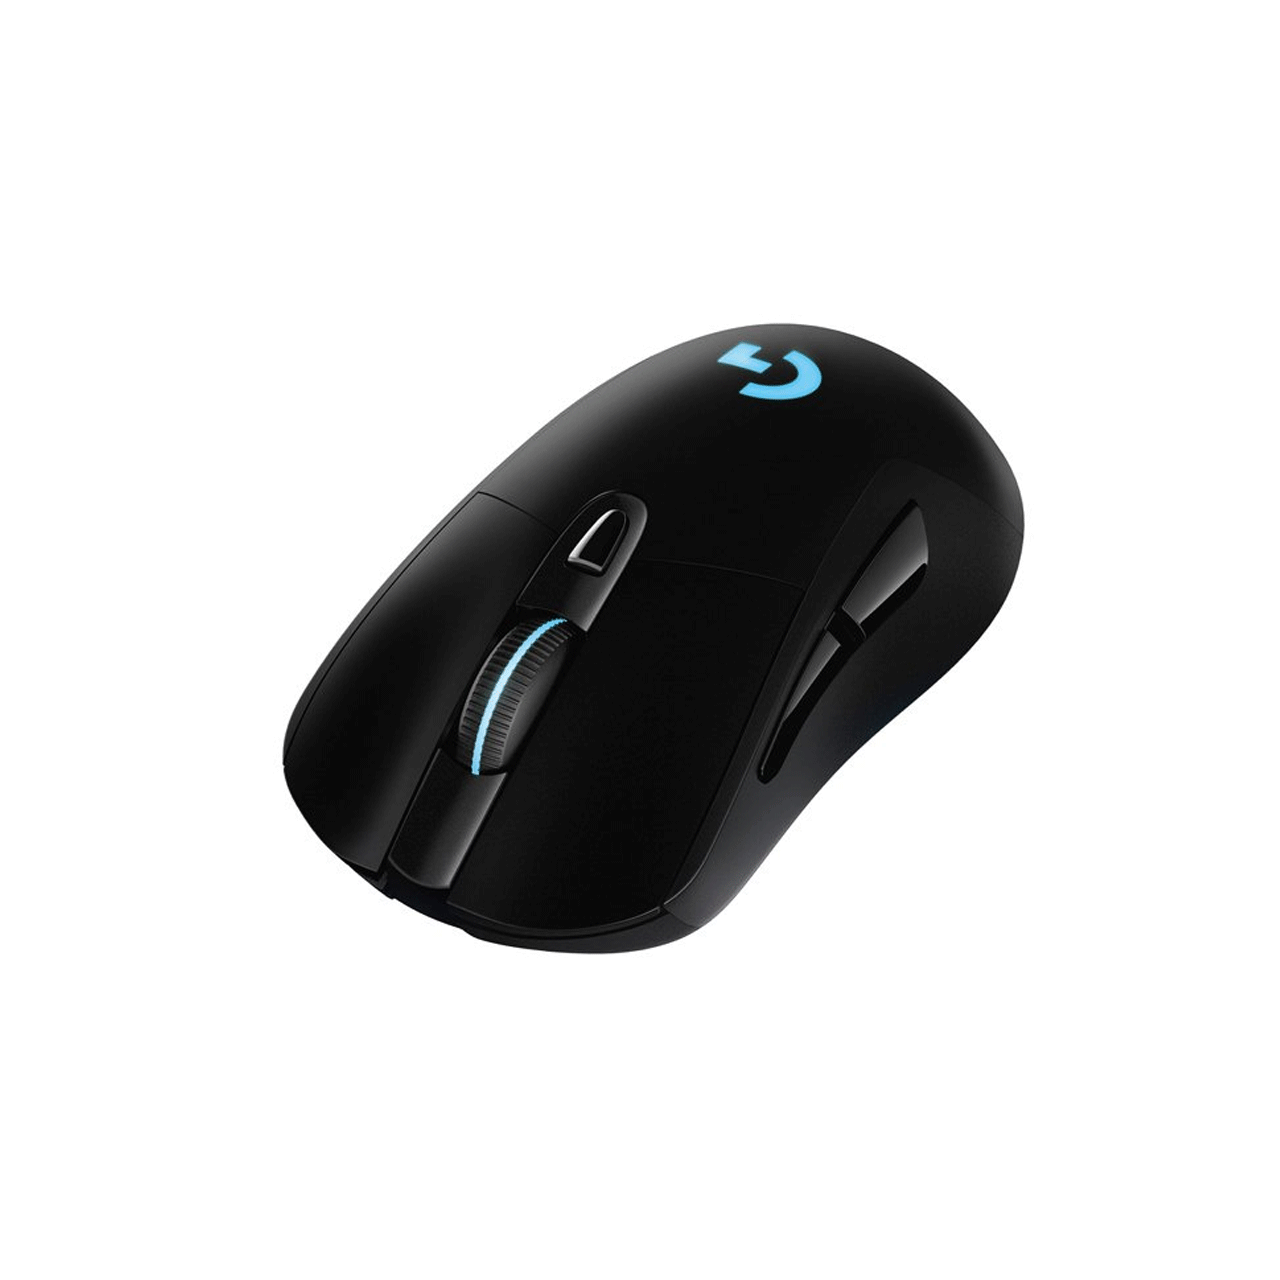 Logitech--G703-Wireless-Gaming-Mouse